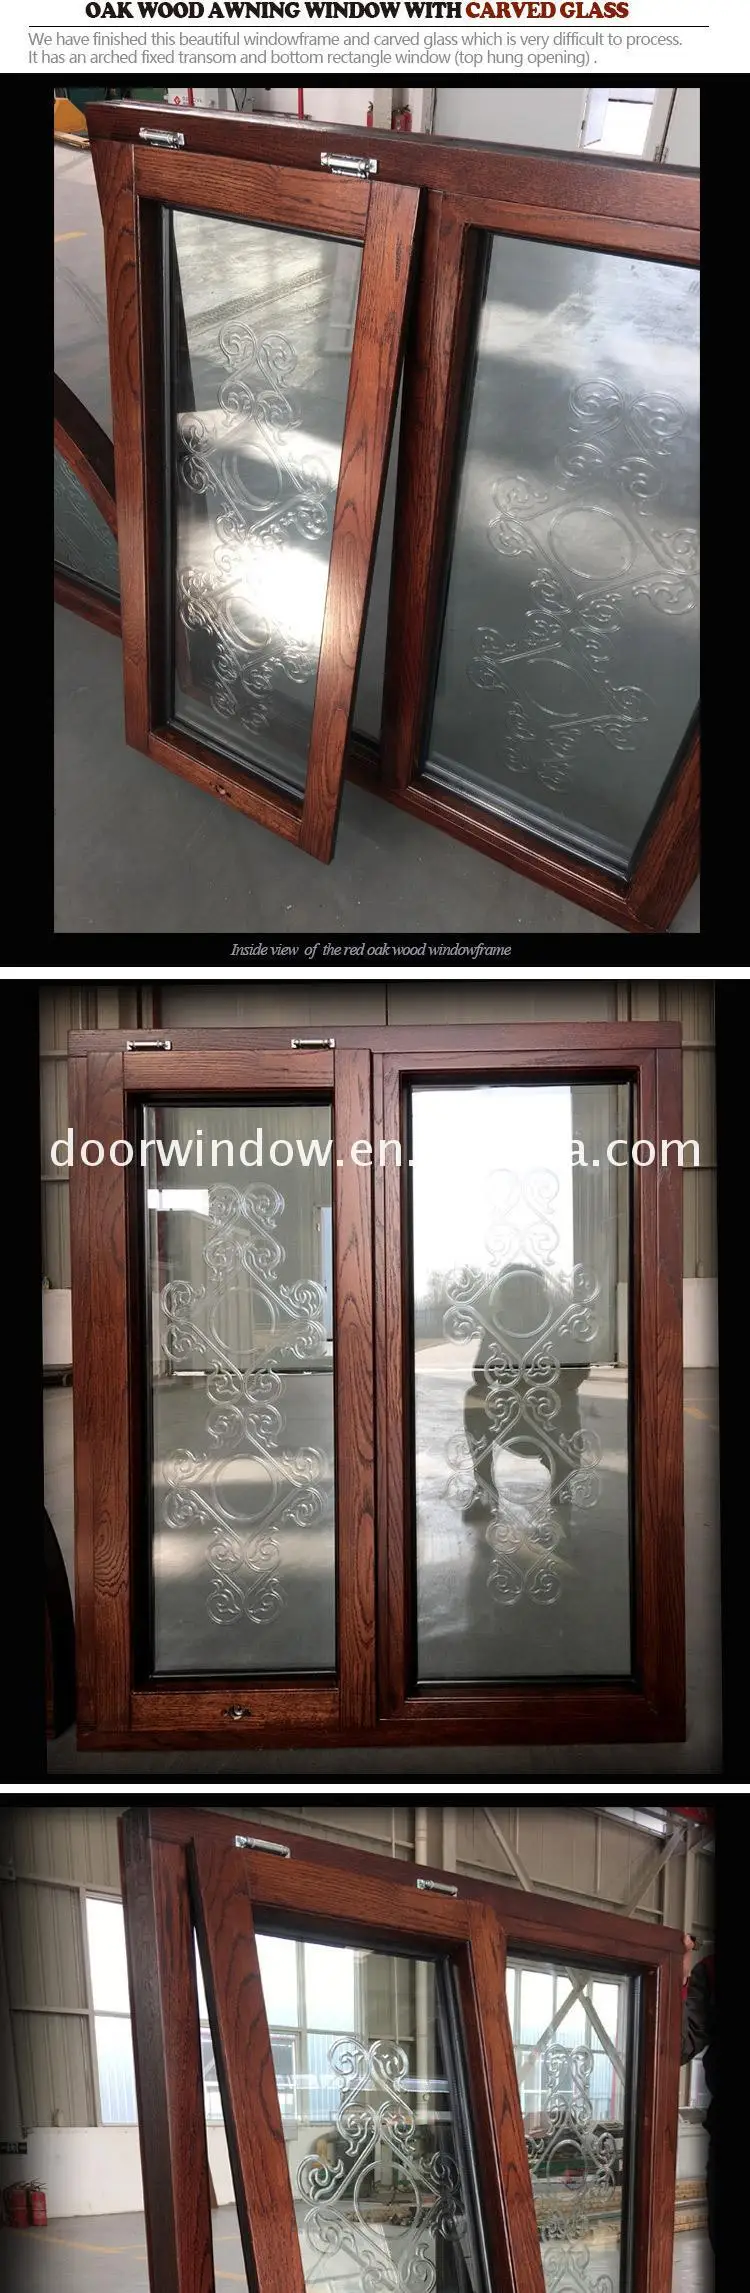 Good quality factory directly bathroom windows perth window styles are wooden better than upvc